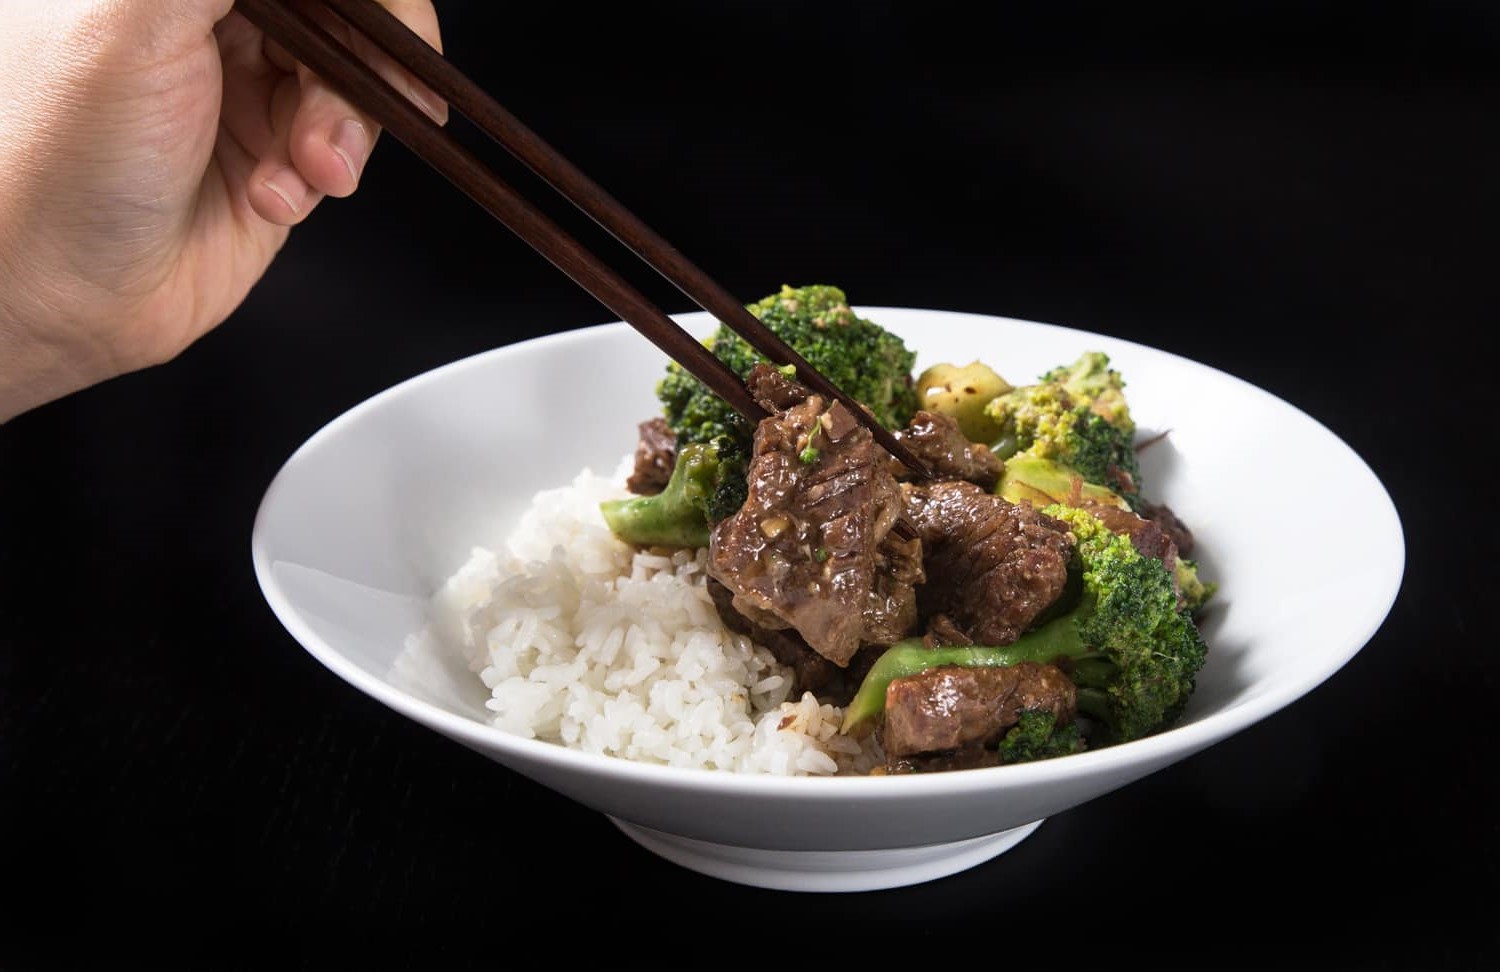 Instant Pot Beef and Broccoli Recipe